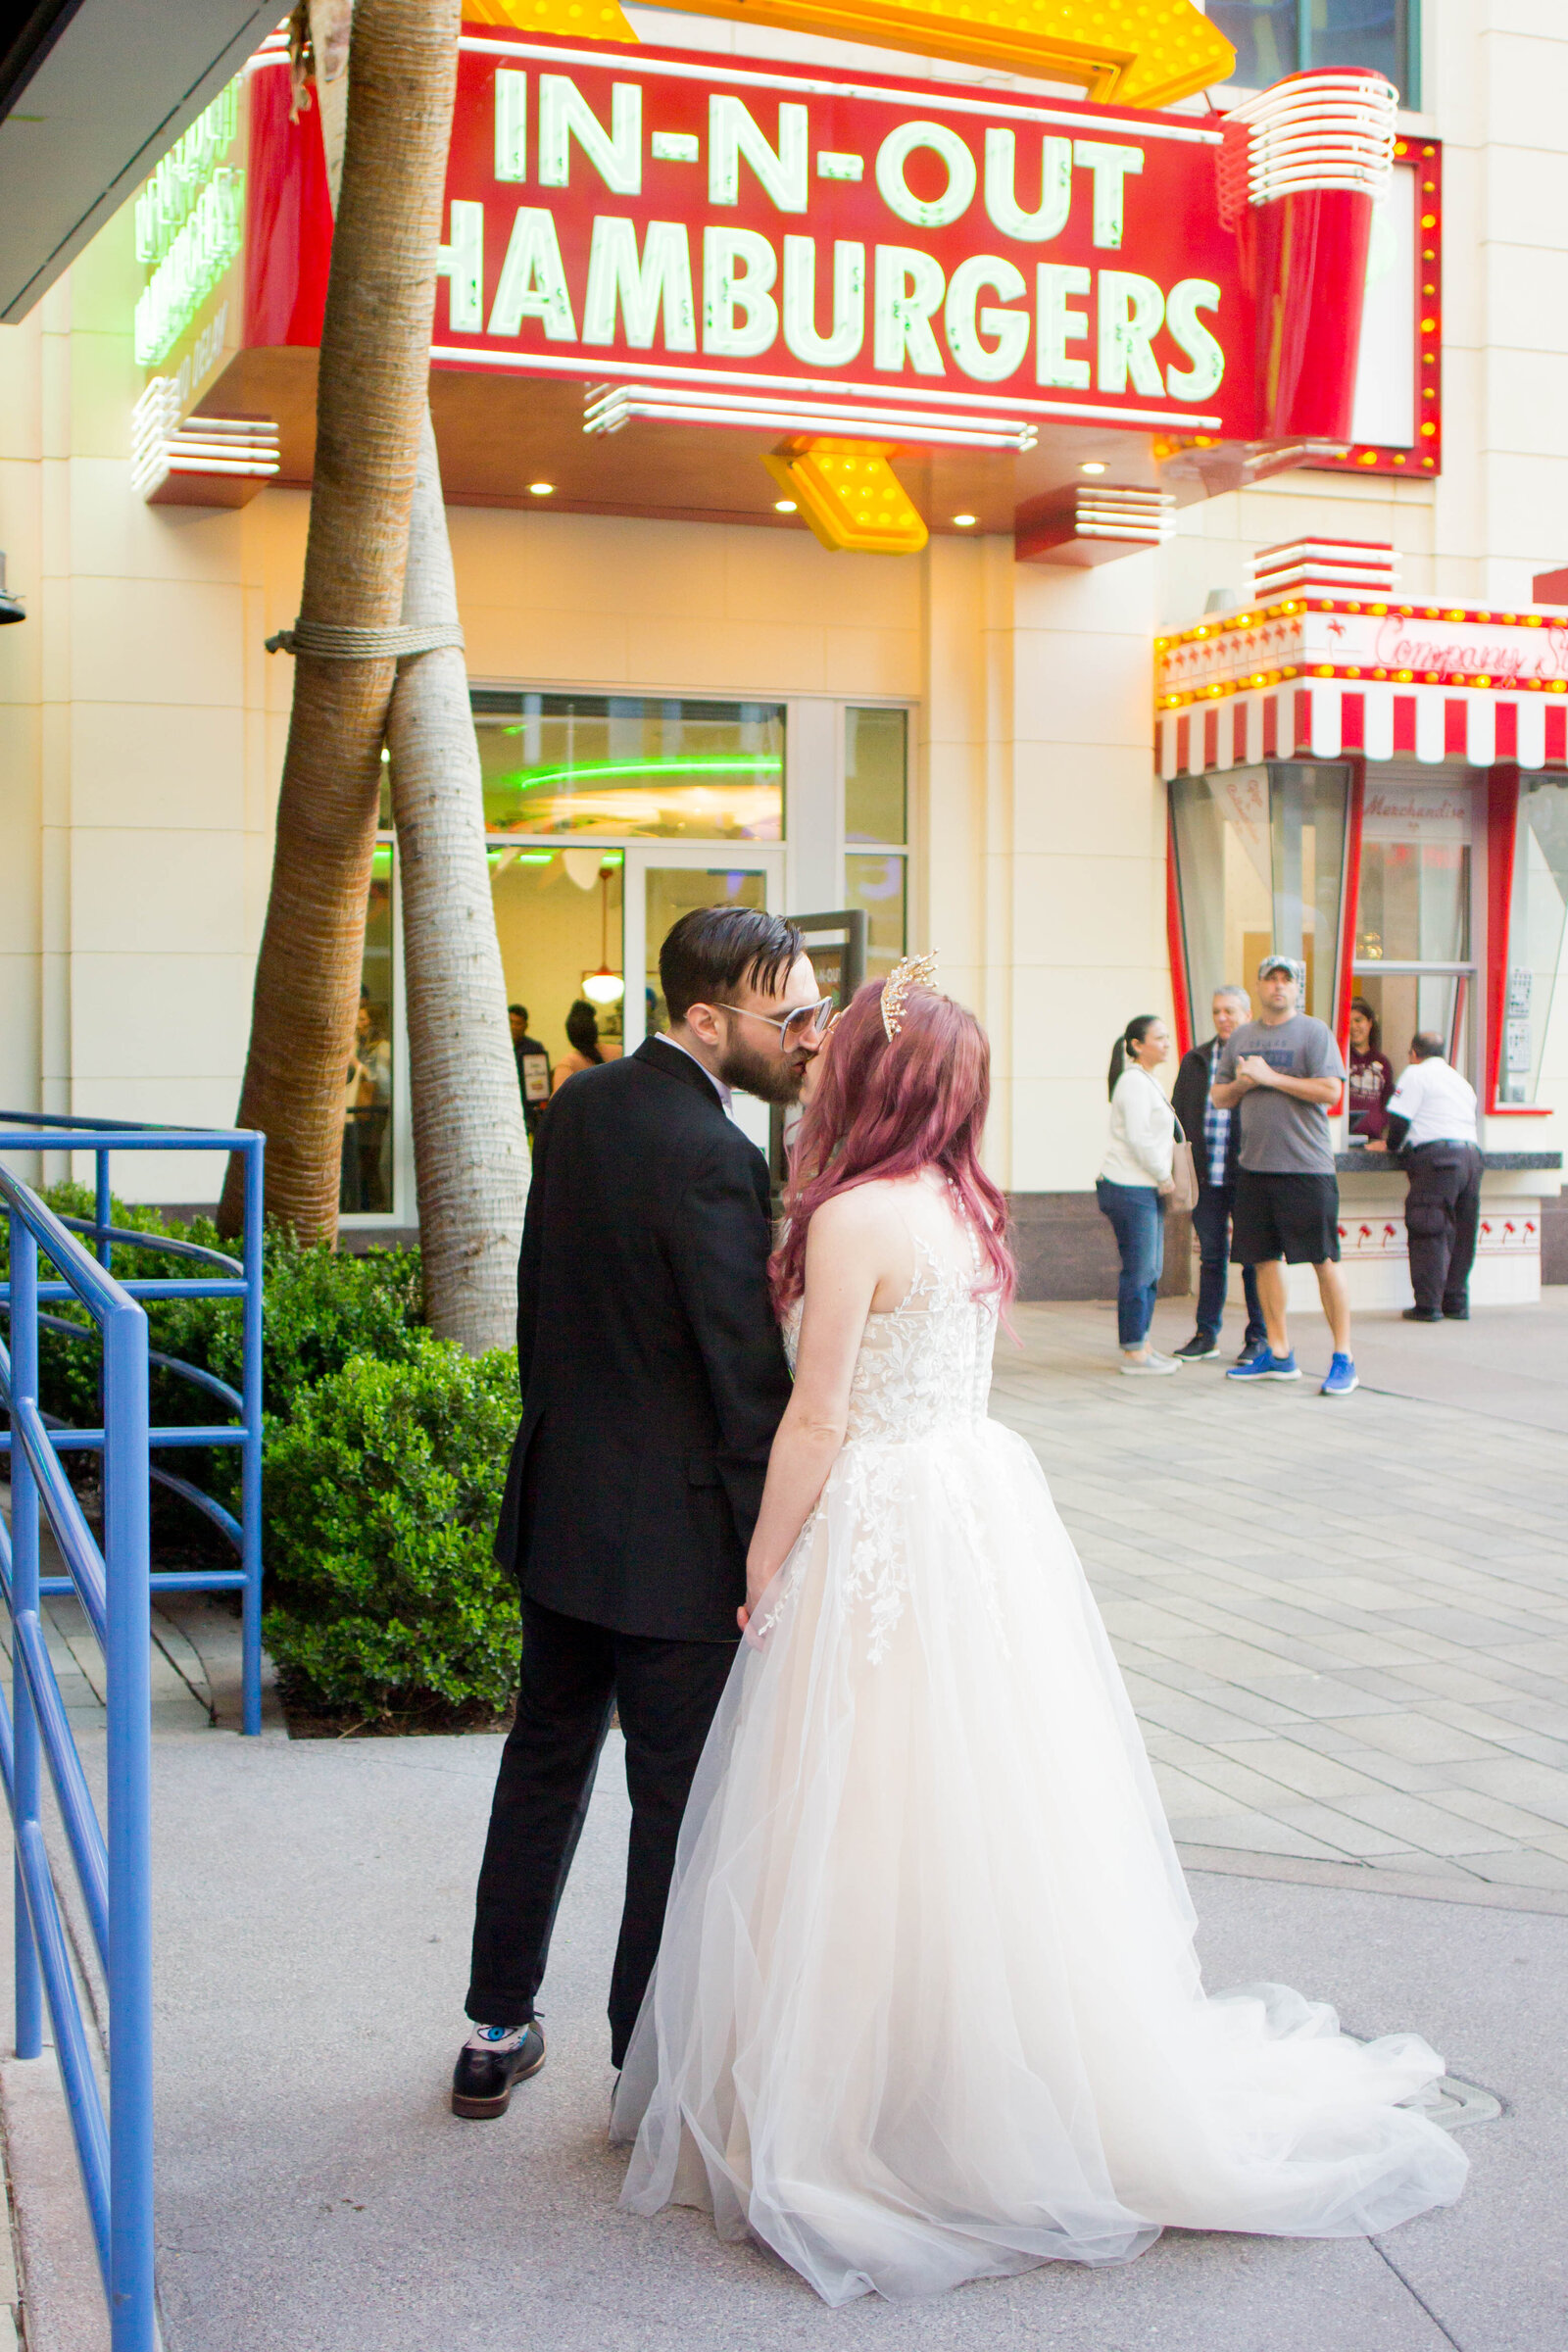 A man and woman kissing on their wedding day in Las Vegas.